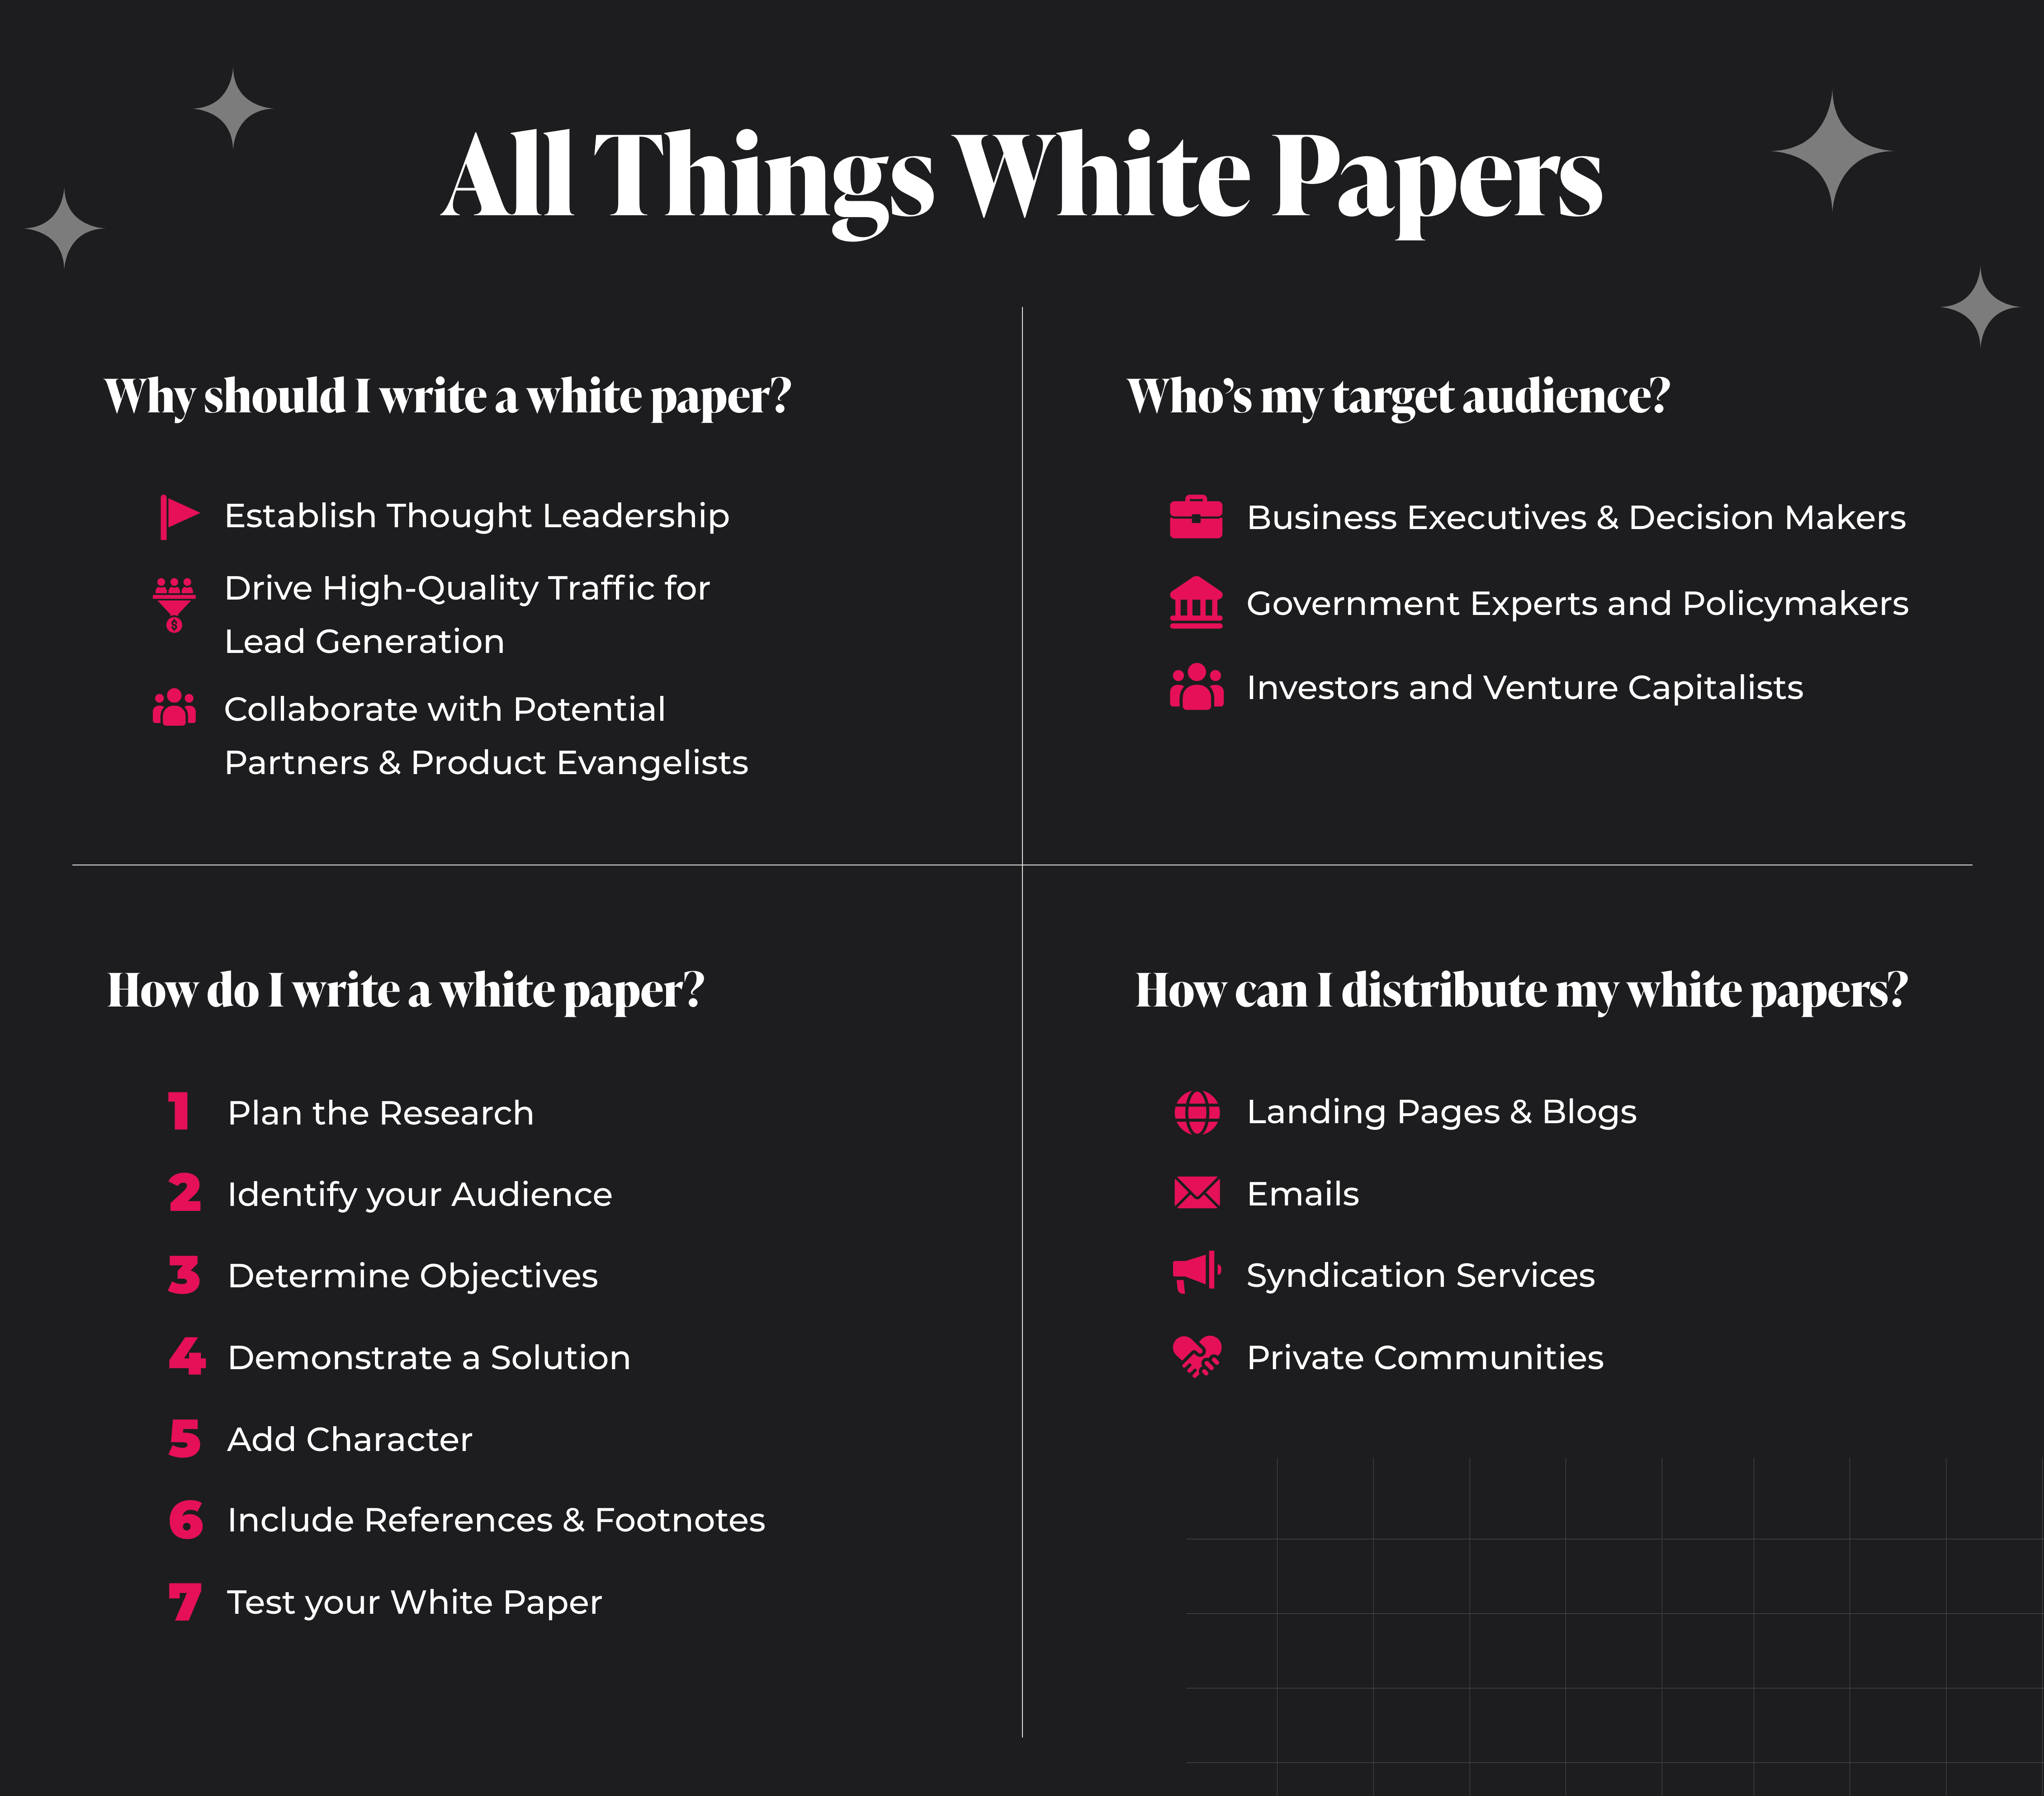 A summary of White paper - purpose, target audience, distribution and Format